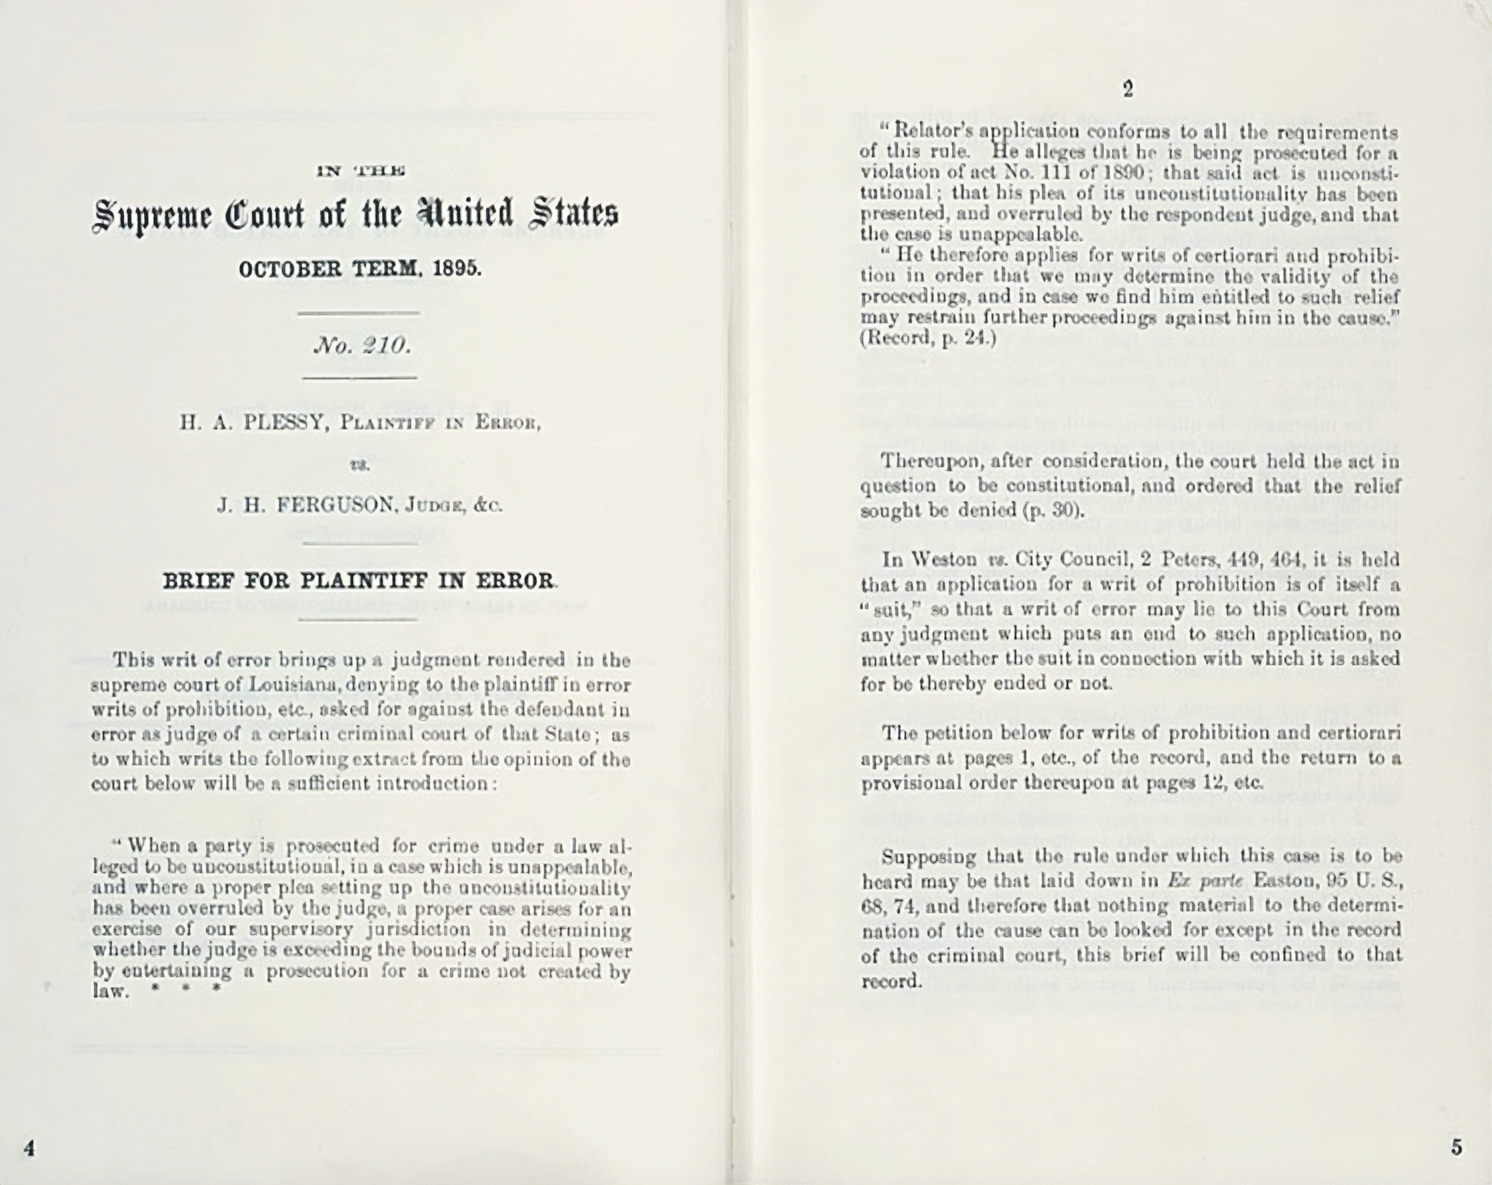 The first two pages of Homer Plessy's brief in the Supreme Court.